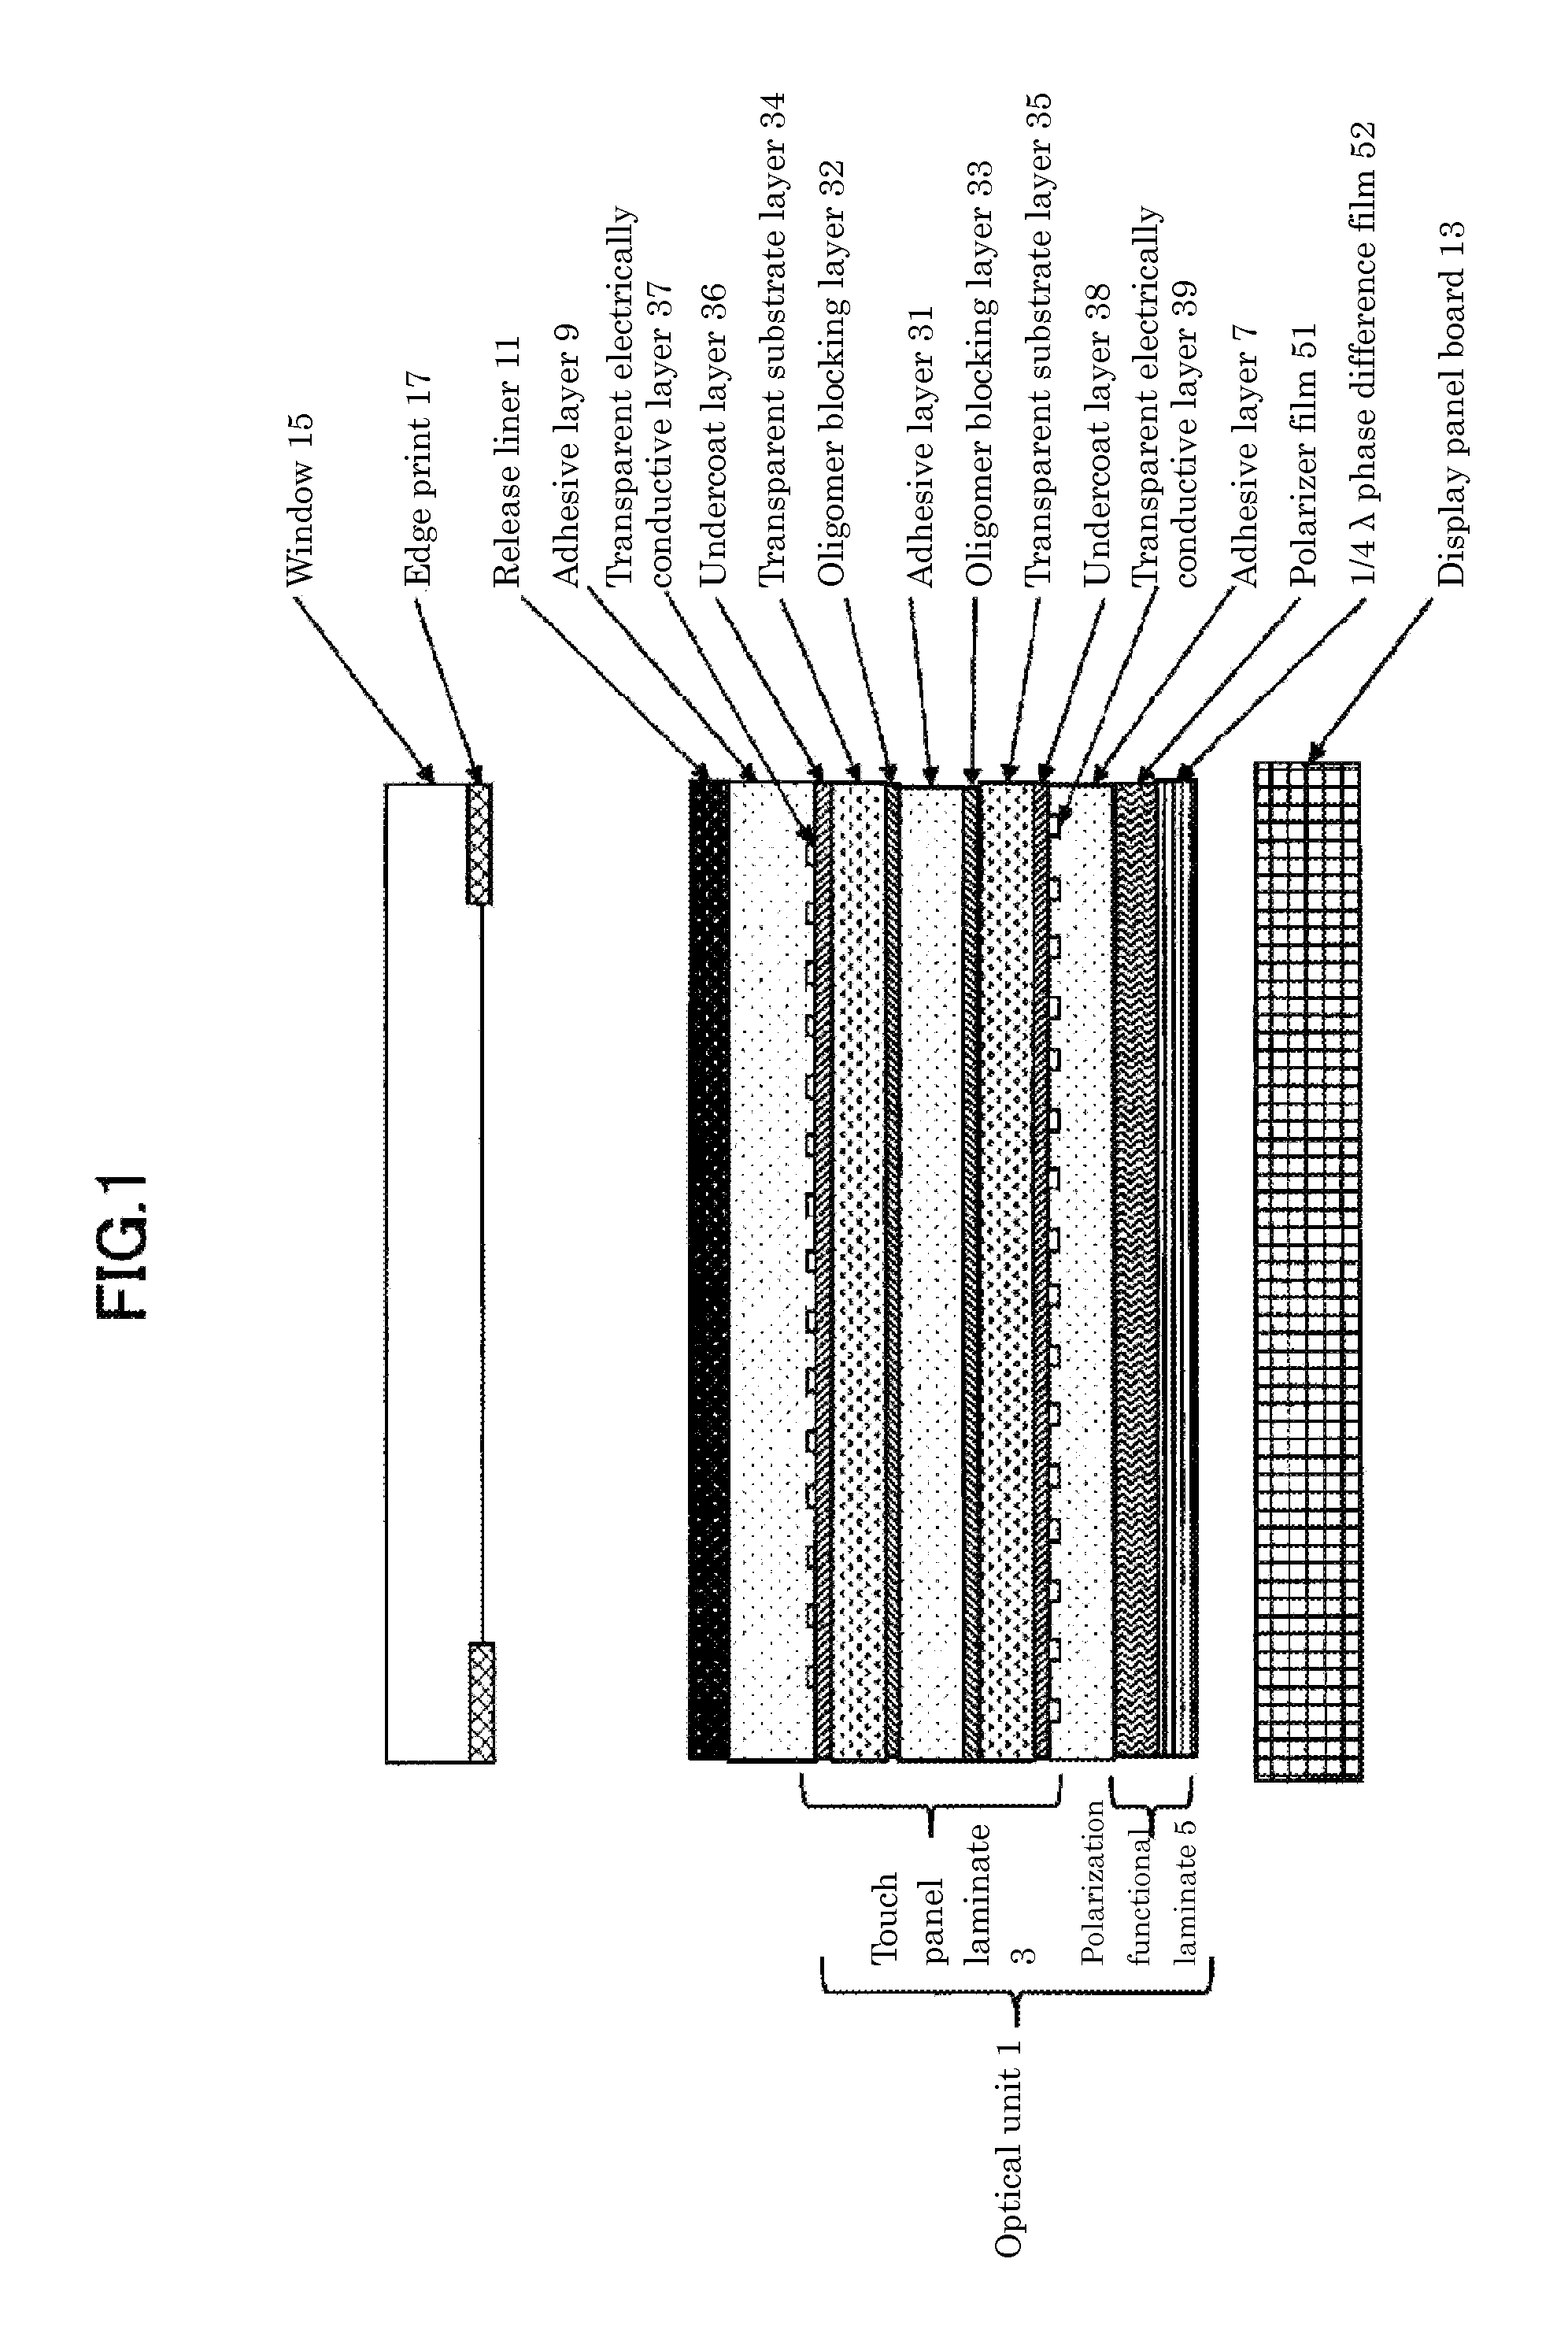 Display panel device with touch input function, optical unit for said display panel device, and production method for same